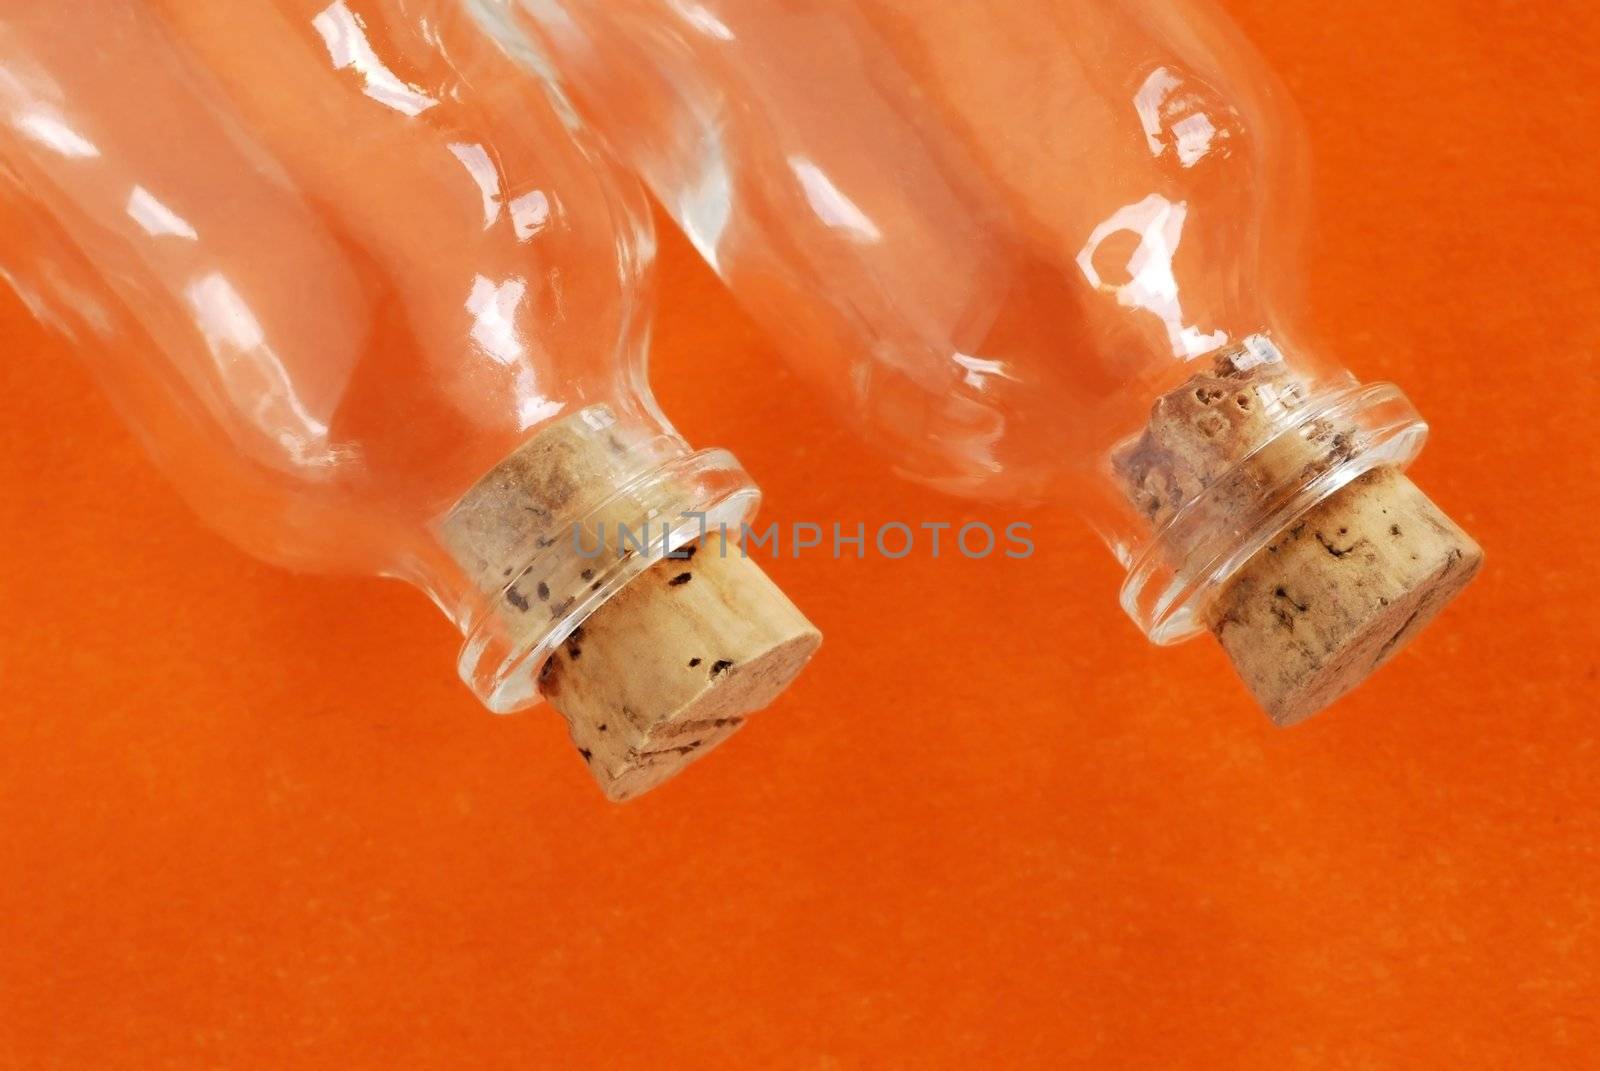 two small empty glass bottles closed with corks over orange background